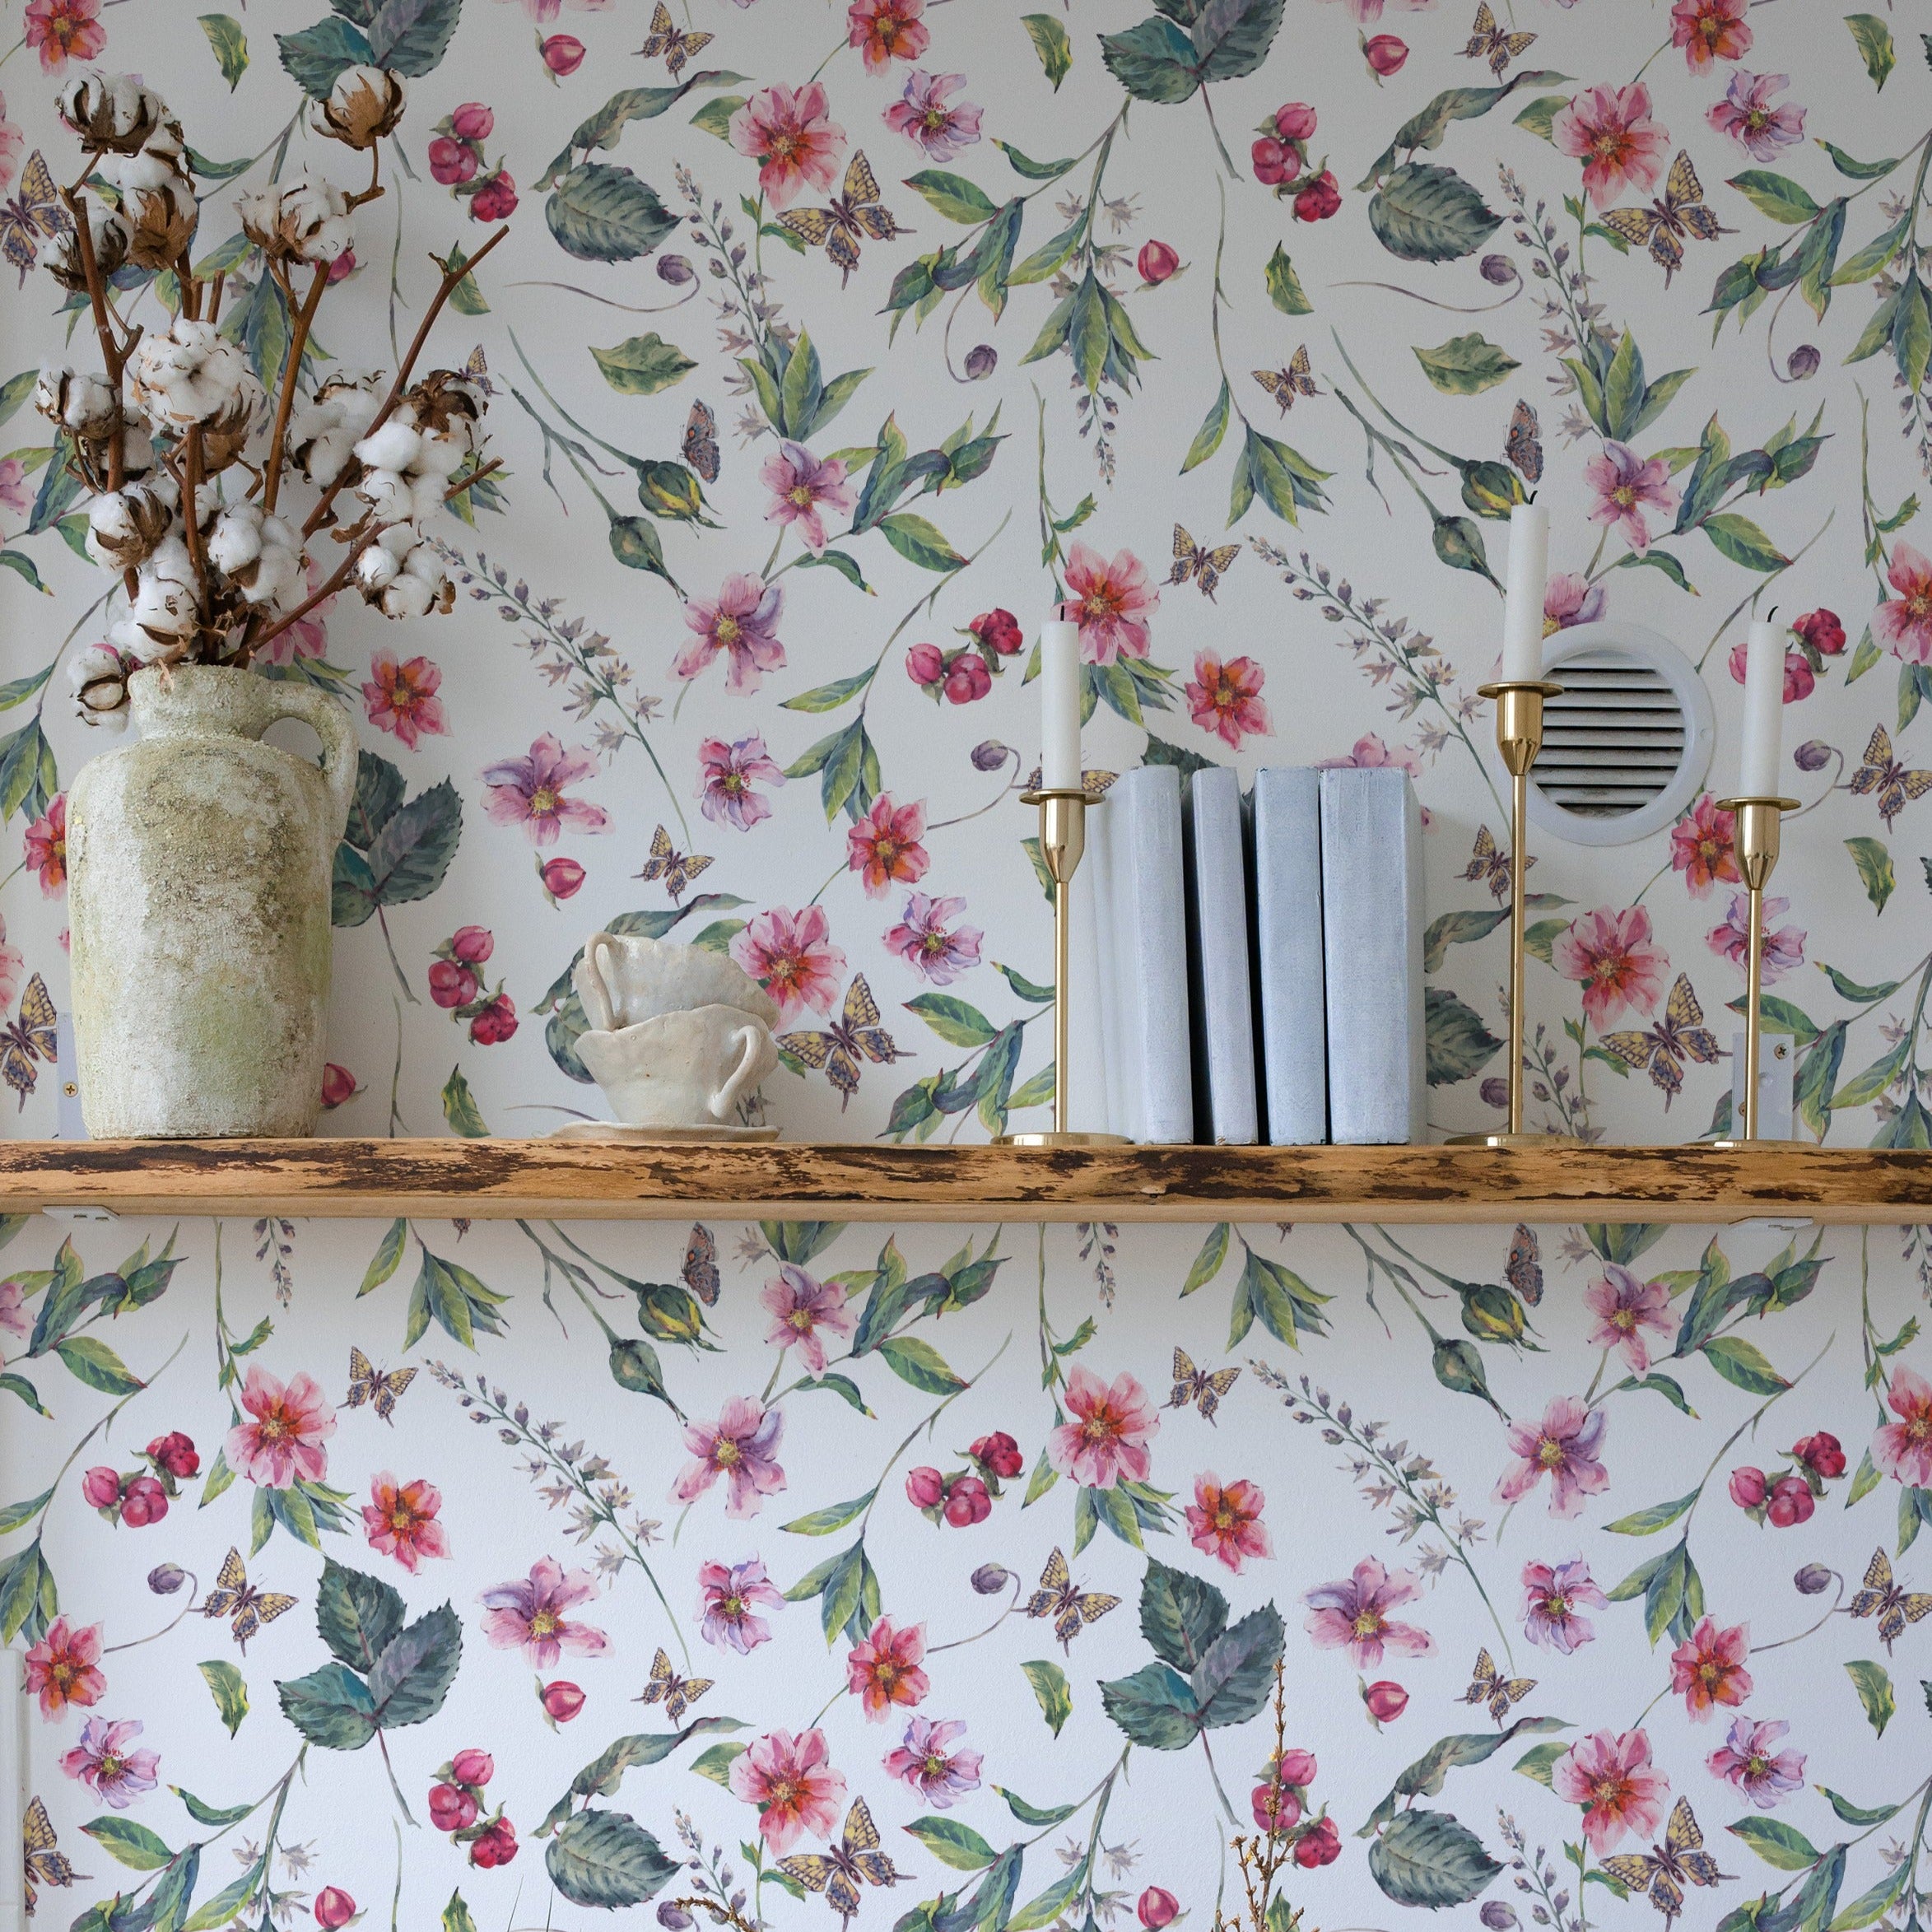 Charming display on a wooden shelf against Graceful Garden Wallpaper, which is adorned with pink flowers, green leaves, and butterflies. Decor includes a rustic vase with dried cotton stems and small books.